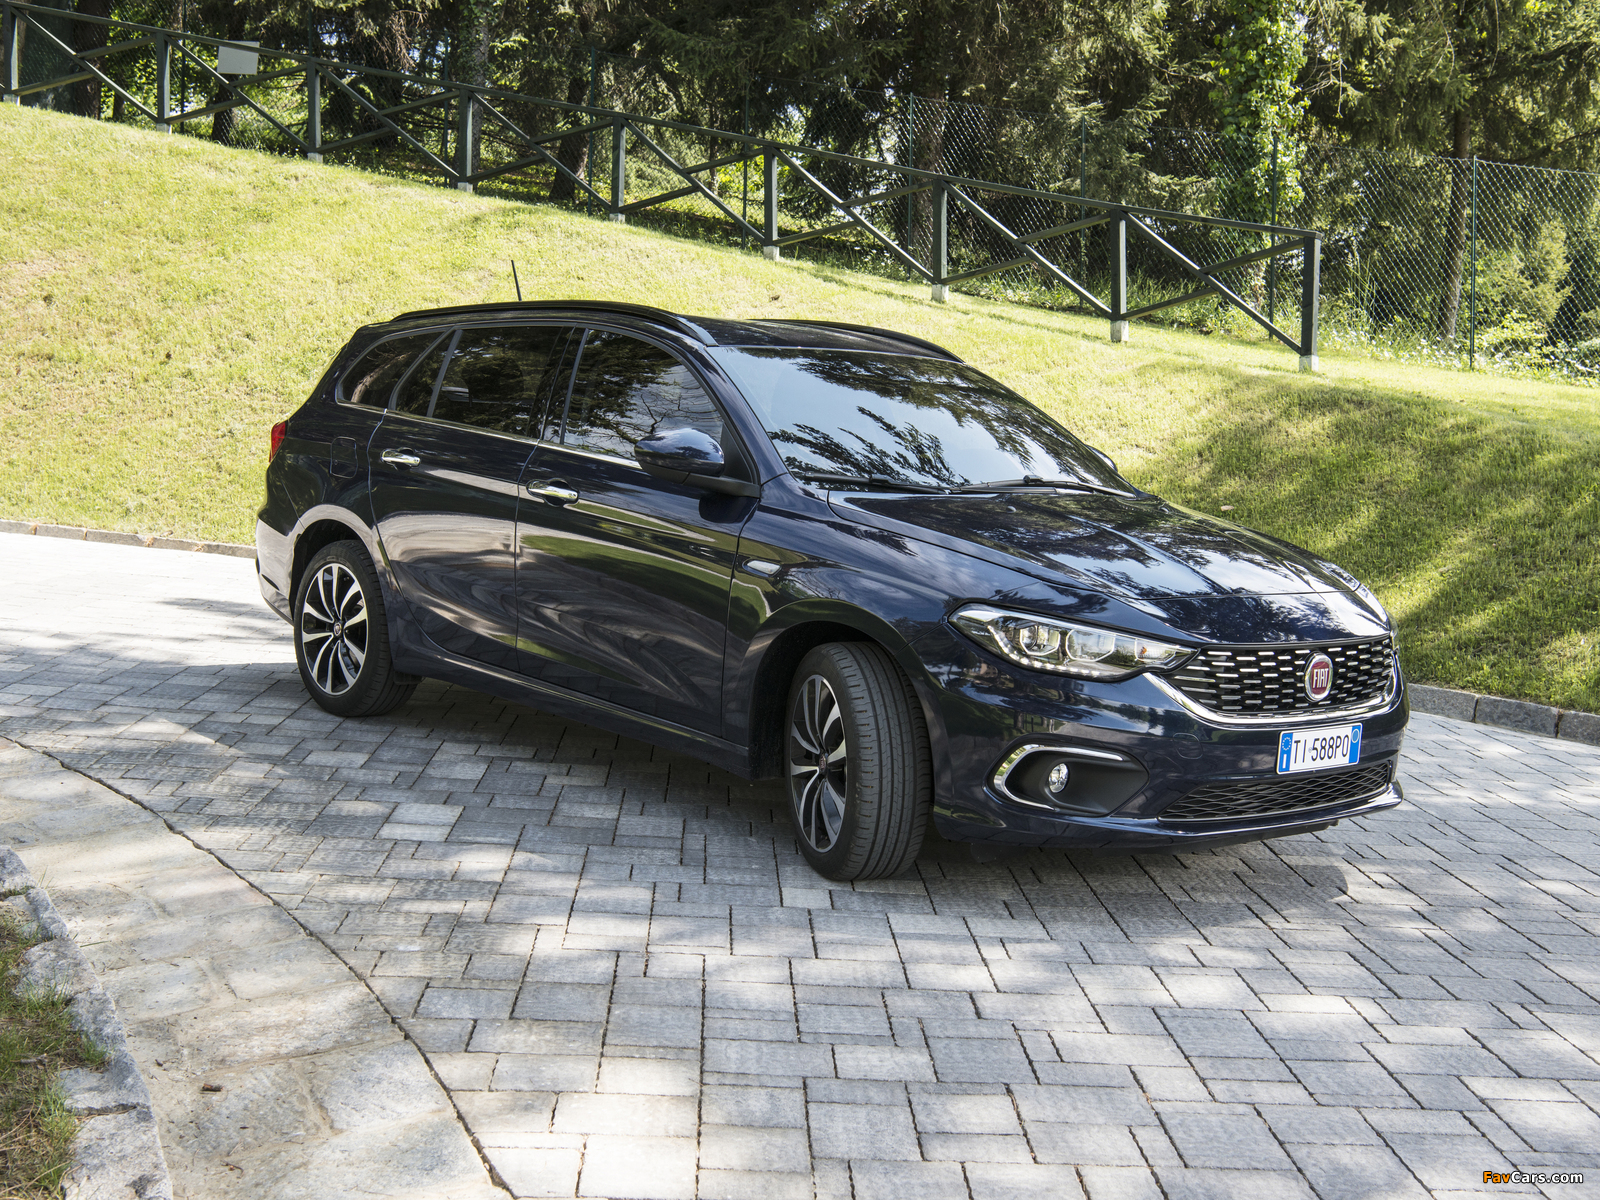 Fiat Tipo Station Wagon (357) 2016 pictures (1600 x 1200)